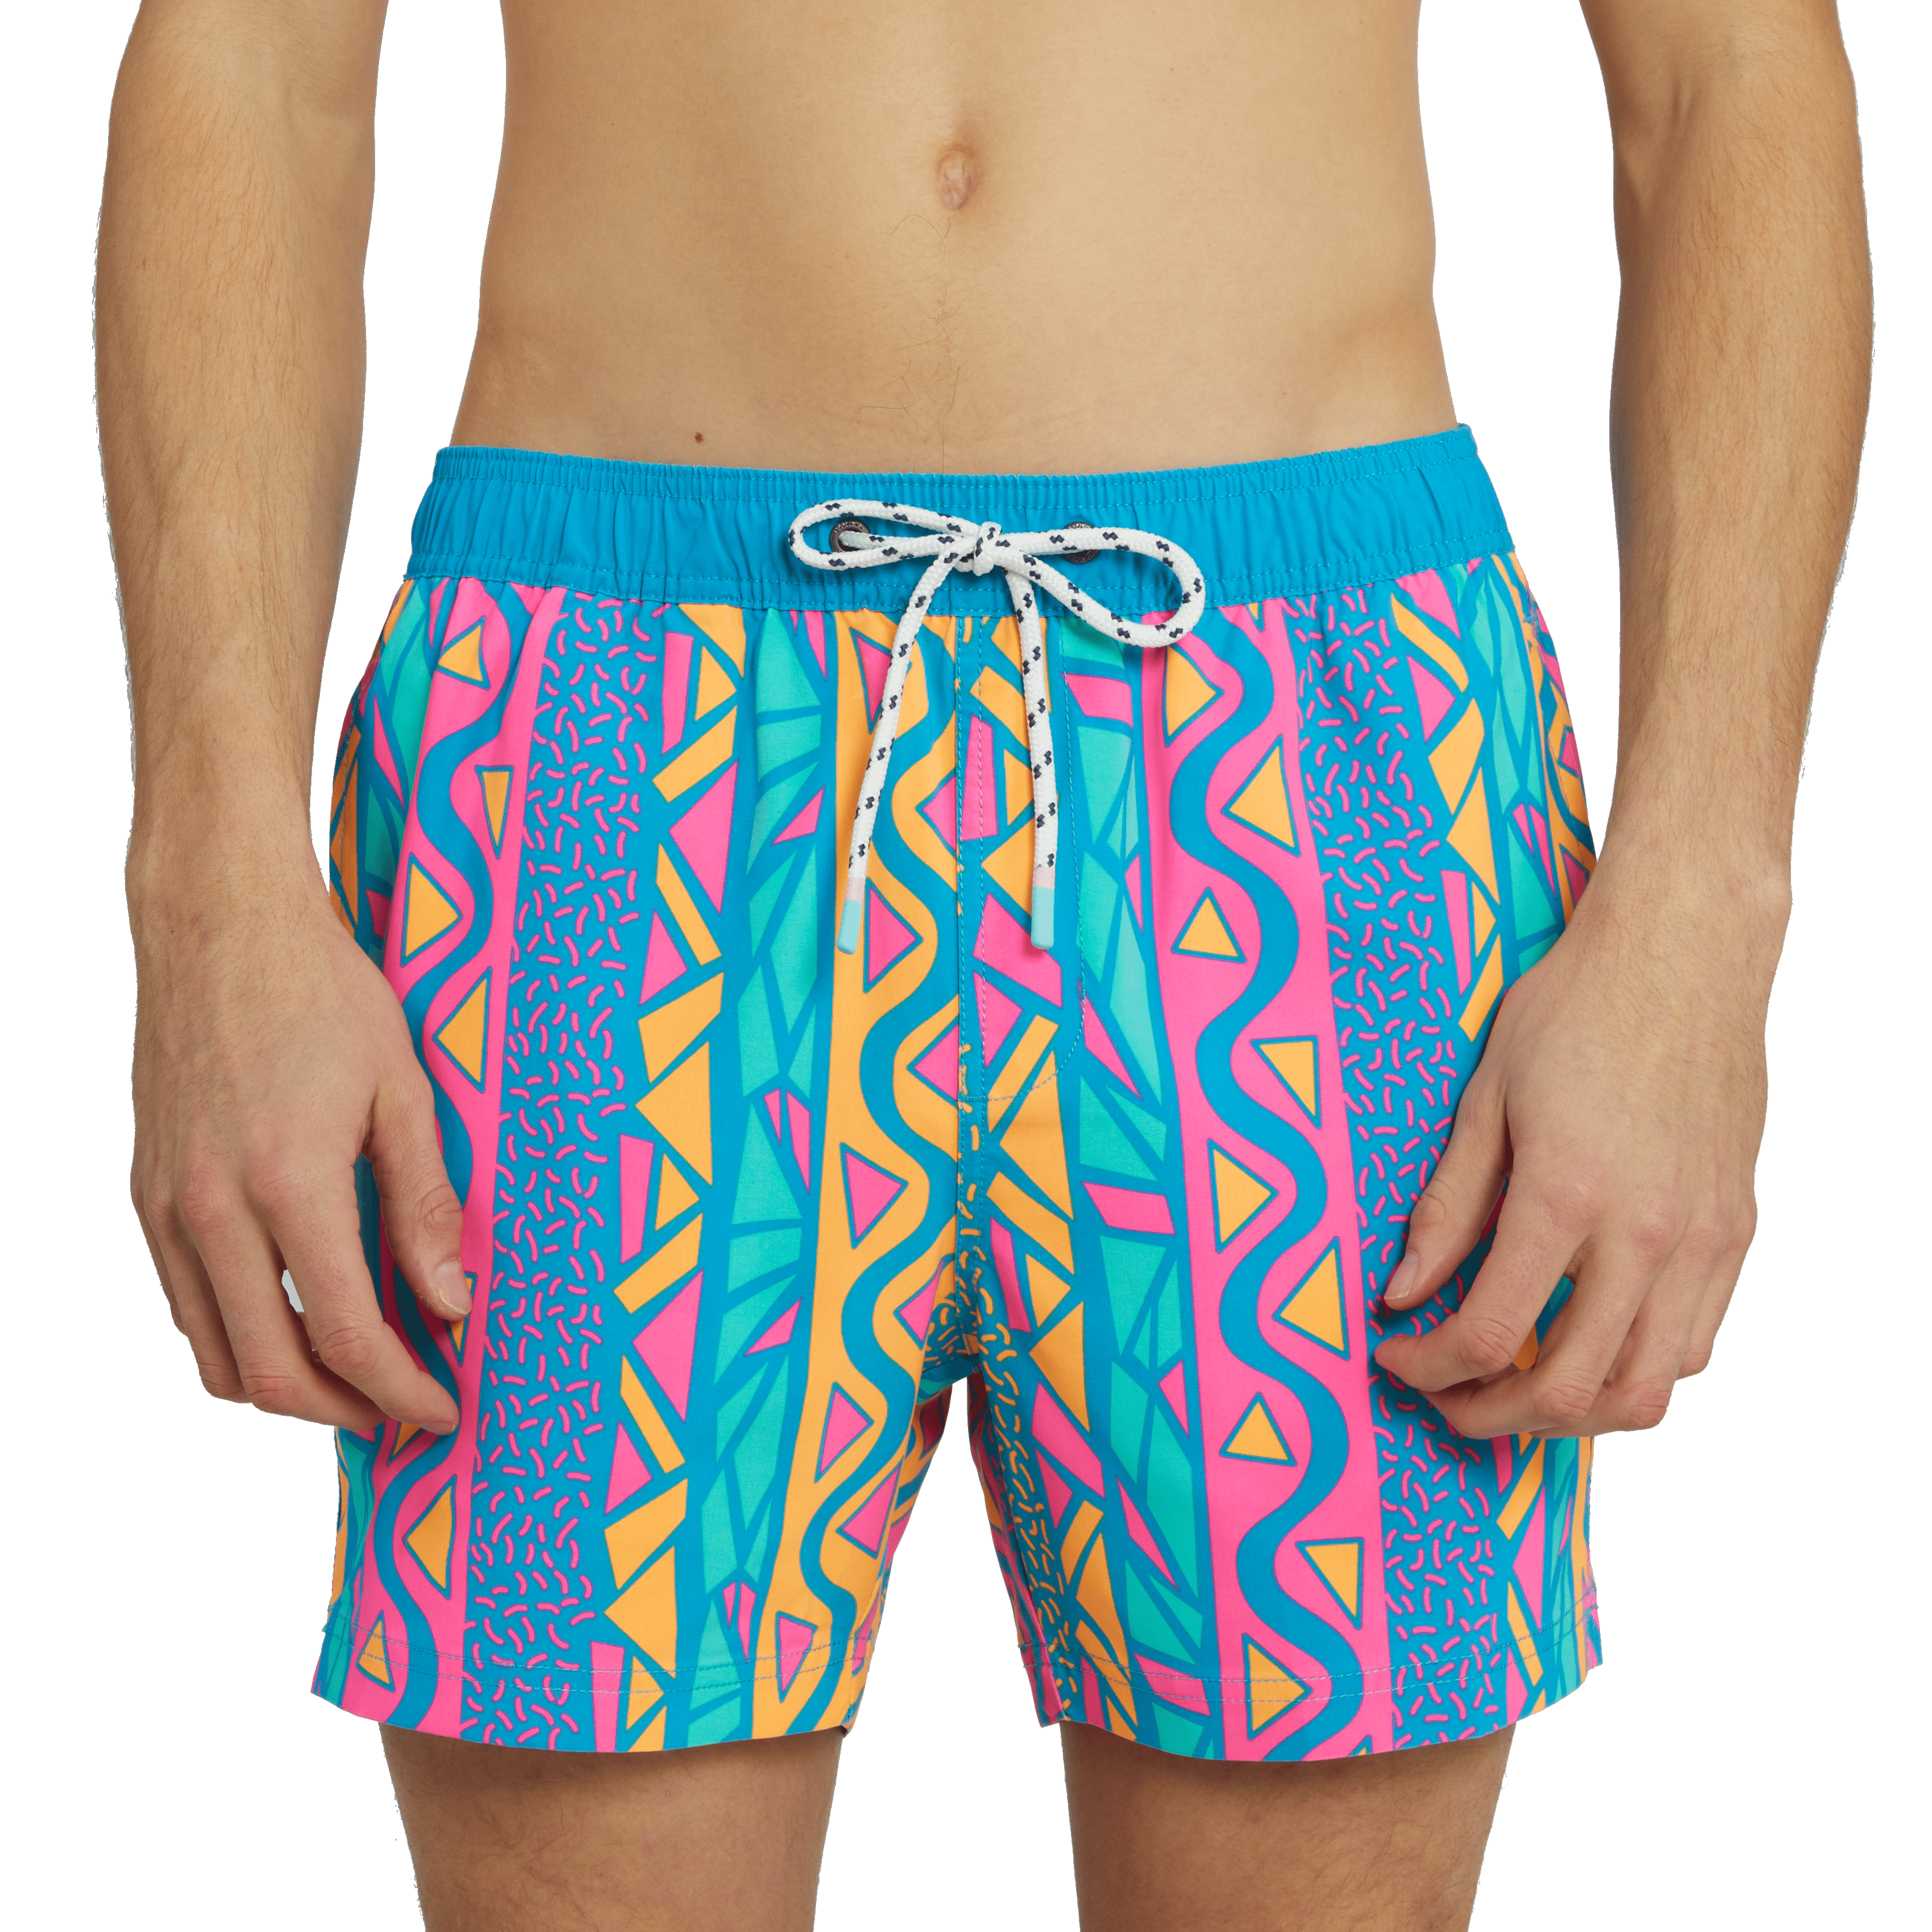 MAUI WOWIE PARTY STARTER SHORT - TEAL PARTY STARTER SHORTS PARTY PANTS 